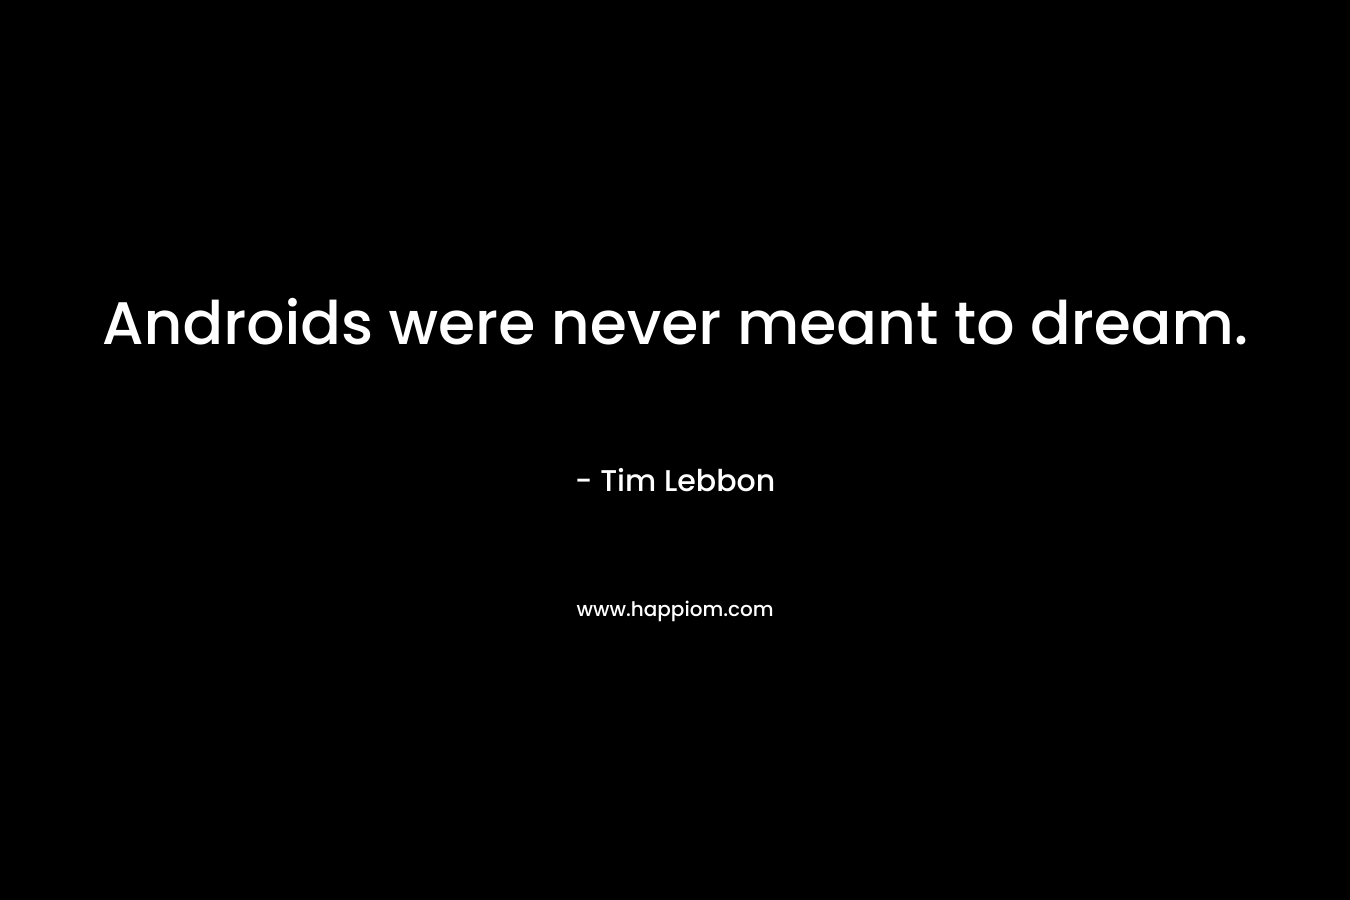 Androids were never meant to dream. – Tim Lebbon